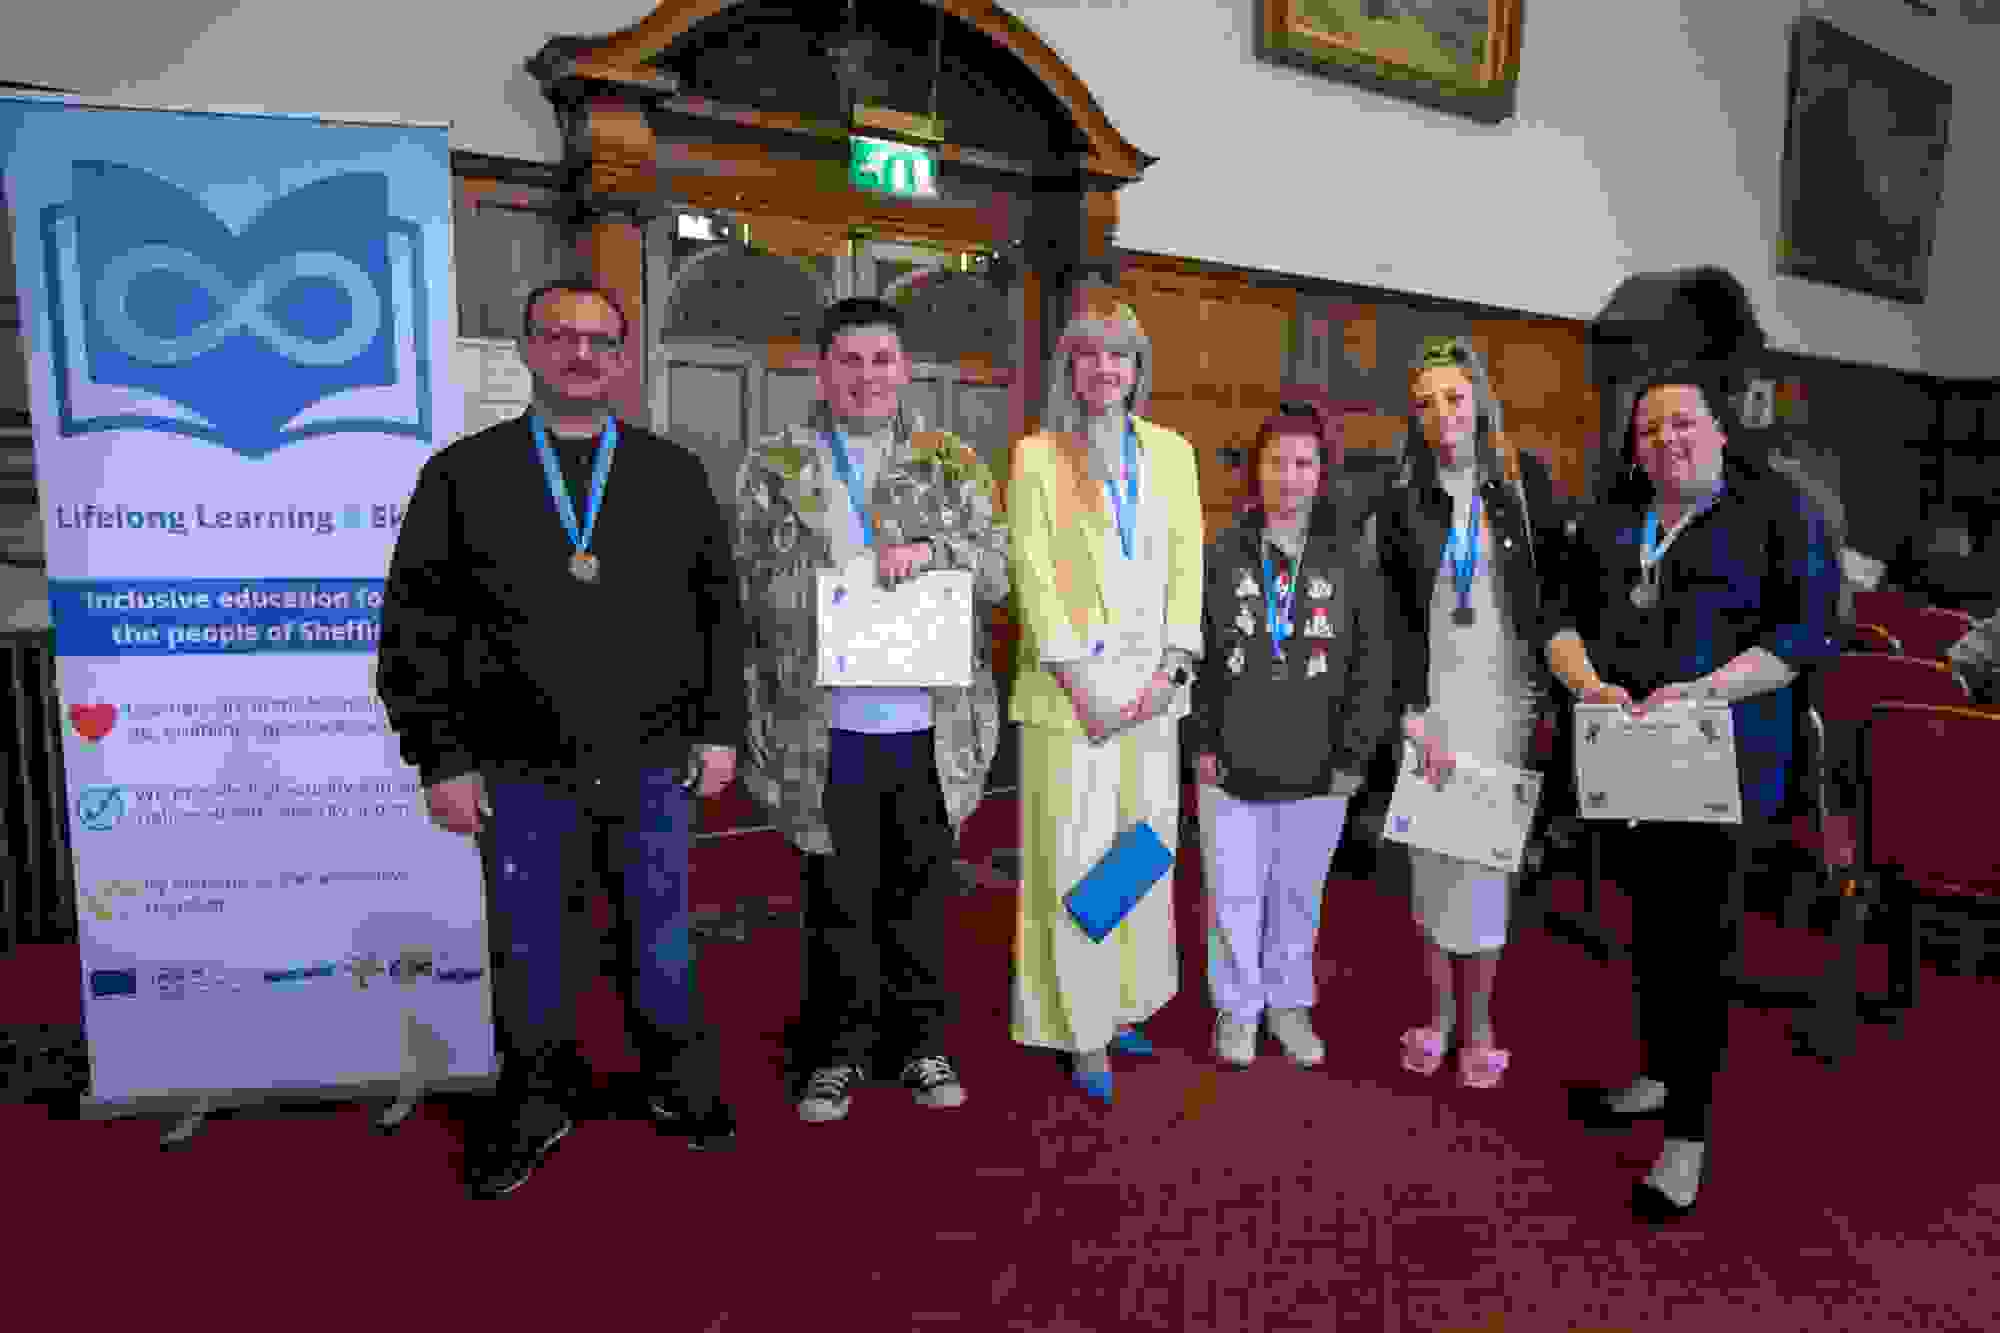 Six people stand in a line in front of a banner for Lifelong Learning in Sheffield Town Hall. 